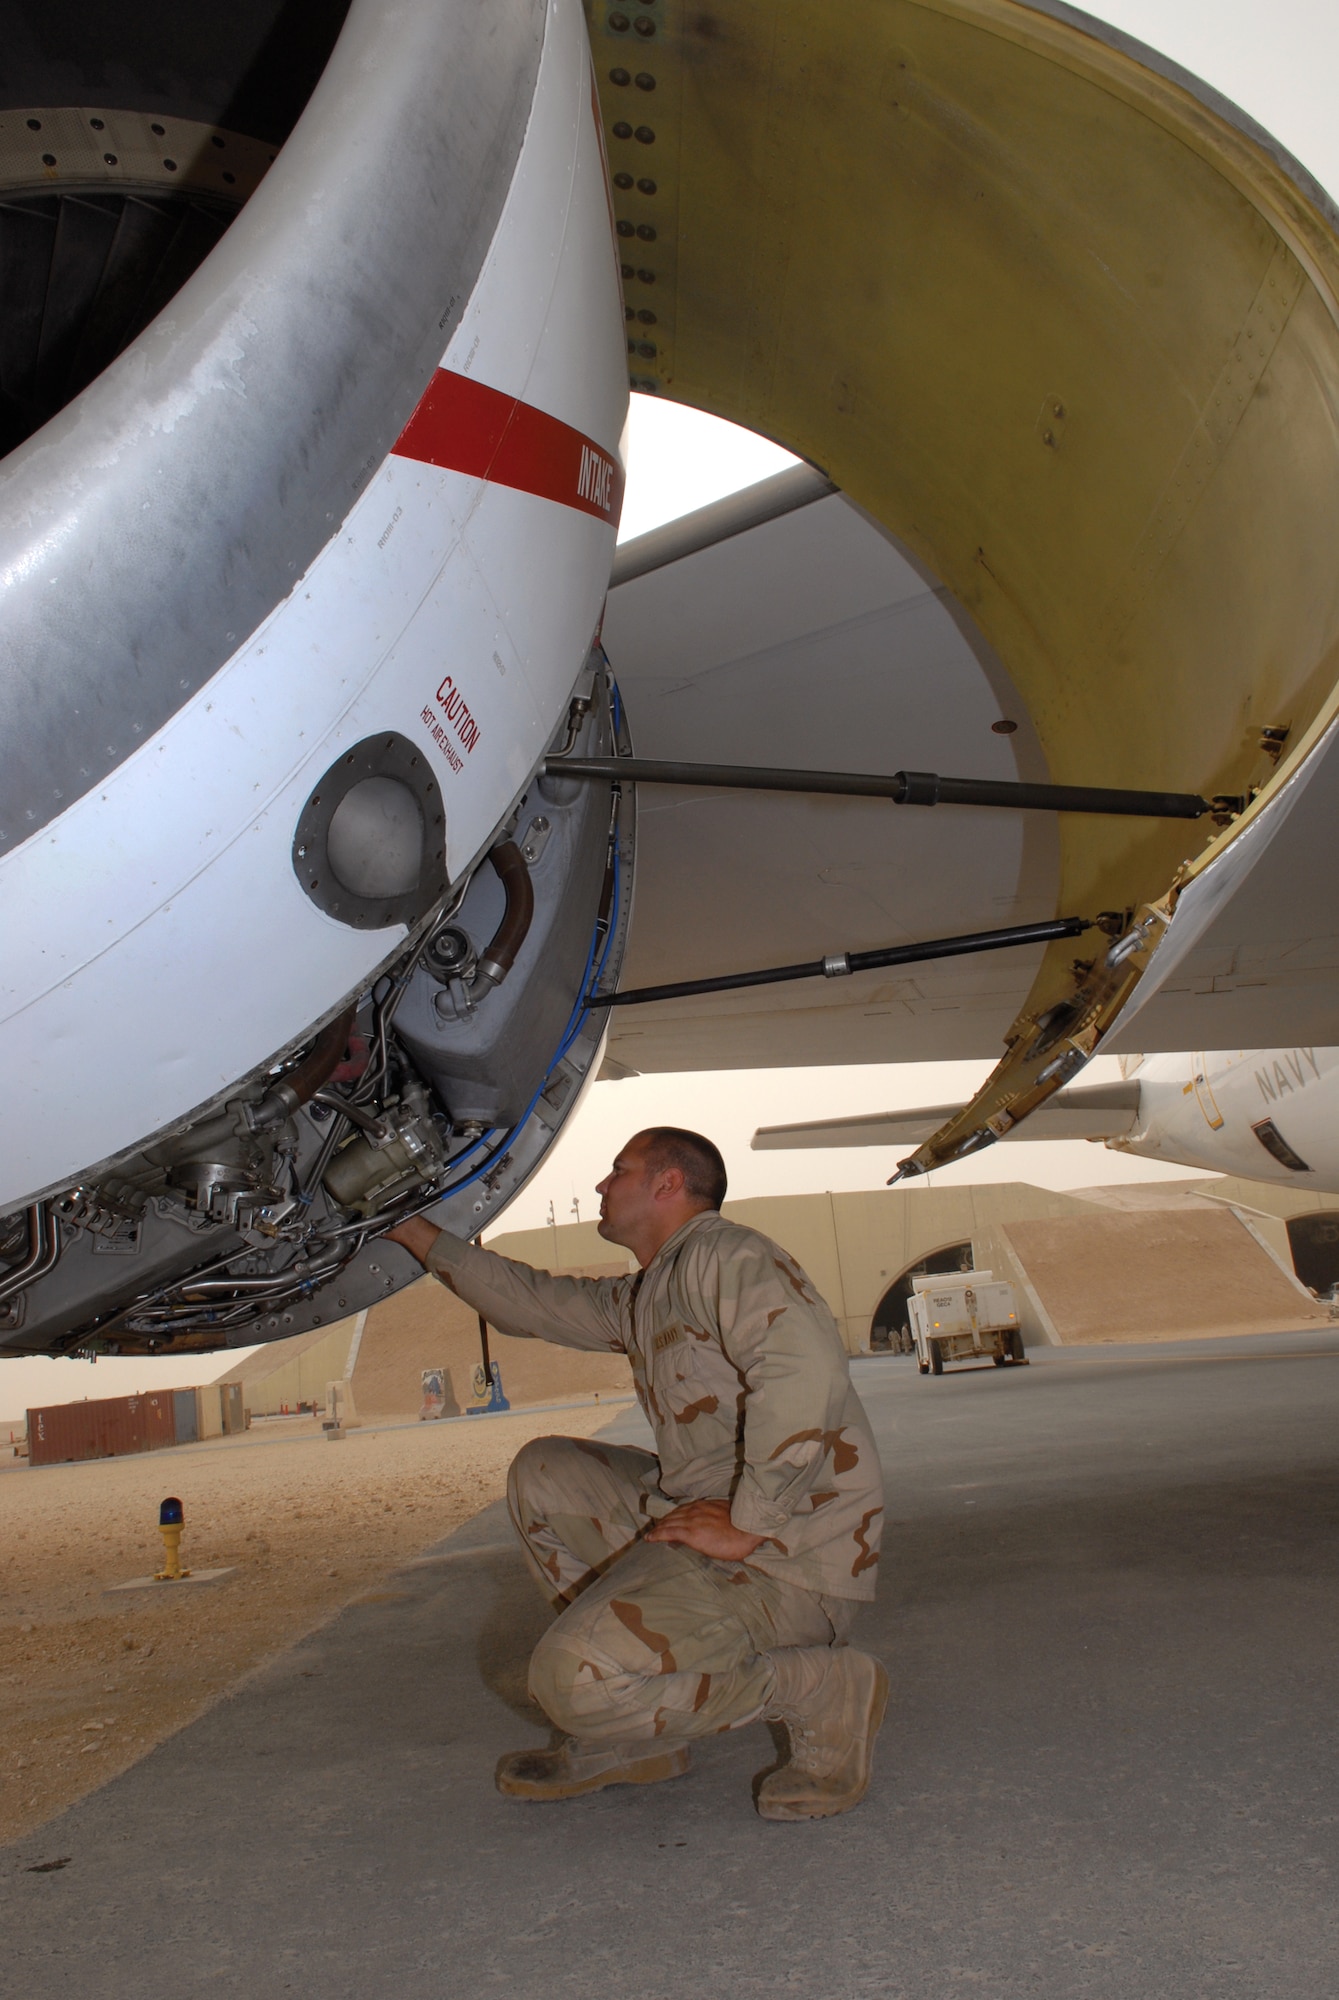 Petty Officer 3rd Class Zach Burghy, TF-124 aviation machinist, checks the oil level of one of the E-6B Mercury jet engine after a mission, April 1, 2009, at an undisclosed location in Southwest Asia. Petty Officer Burghy hails from Livingston, Wis. and is deployed from Tinker Air Force Base, Okla., in support of Operations Iraqi and Enduring Freedom and Combined Joint Task Force - Horn of Africa. (U.S. Air Force photo by Senior Airman Andrew Satran/Released)